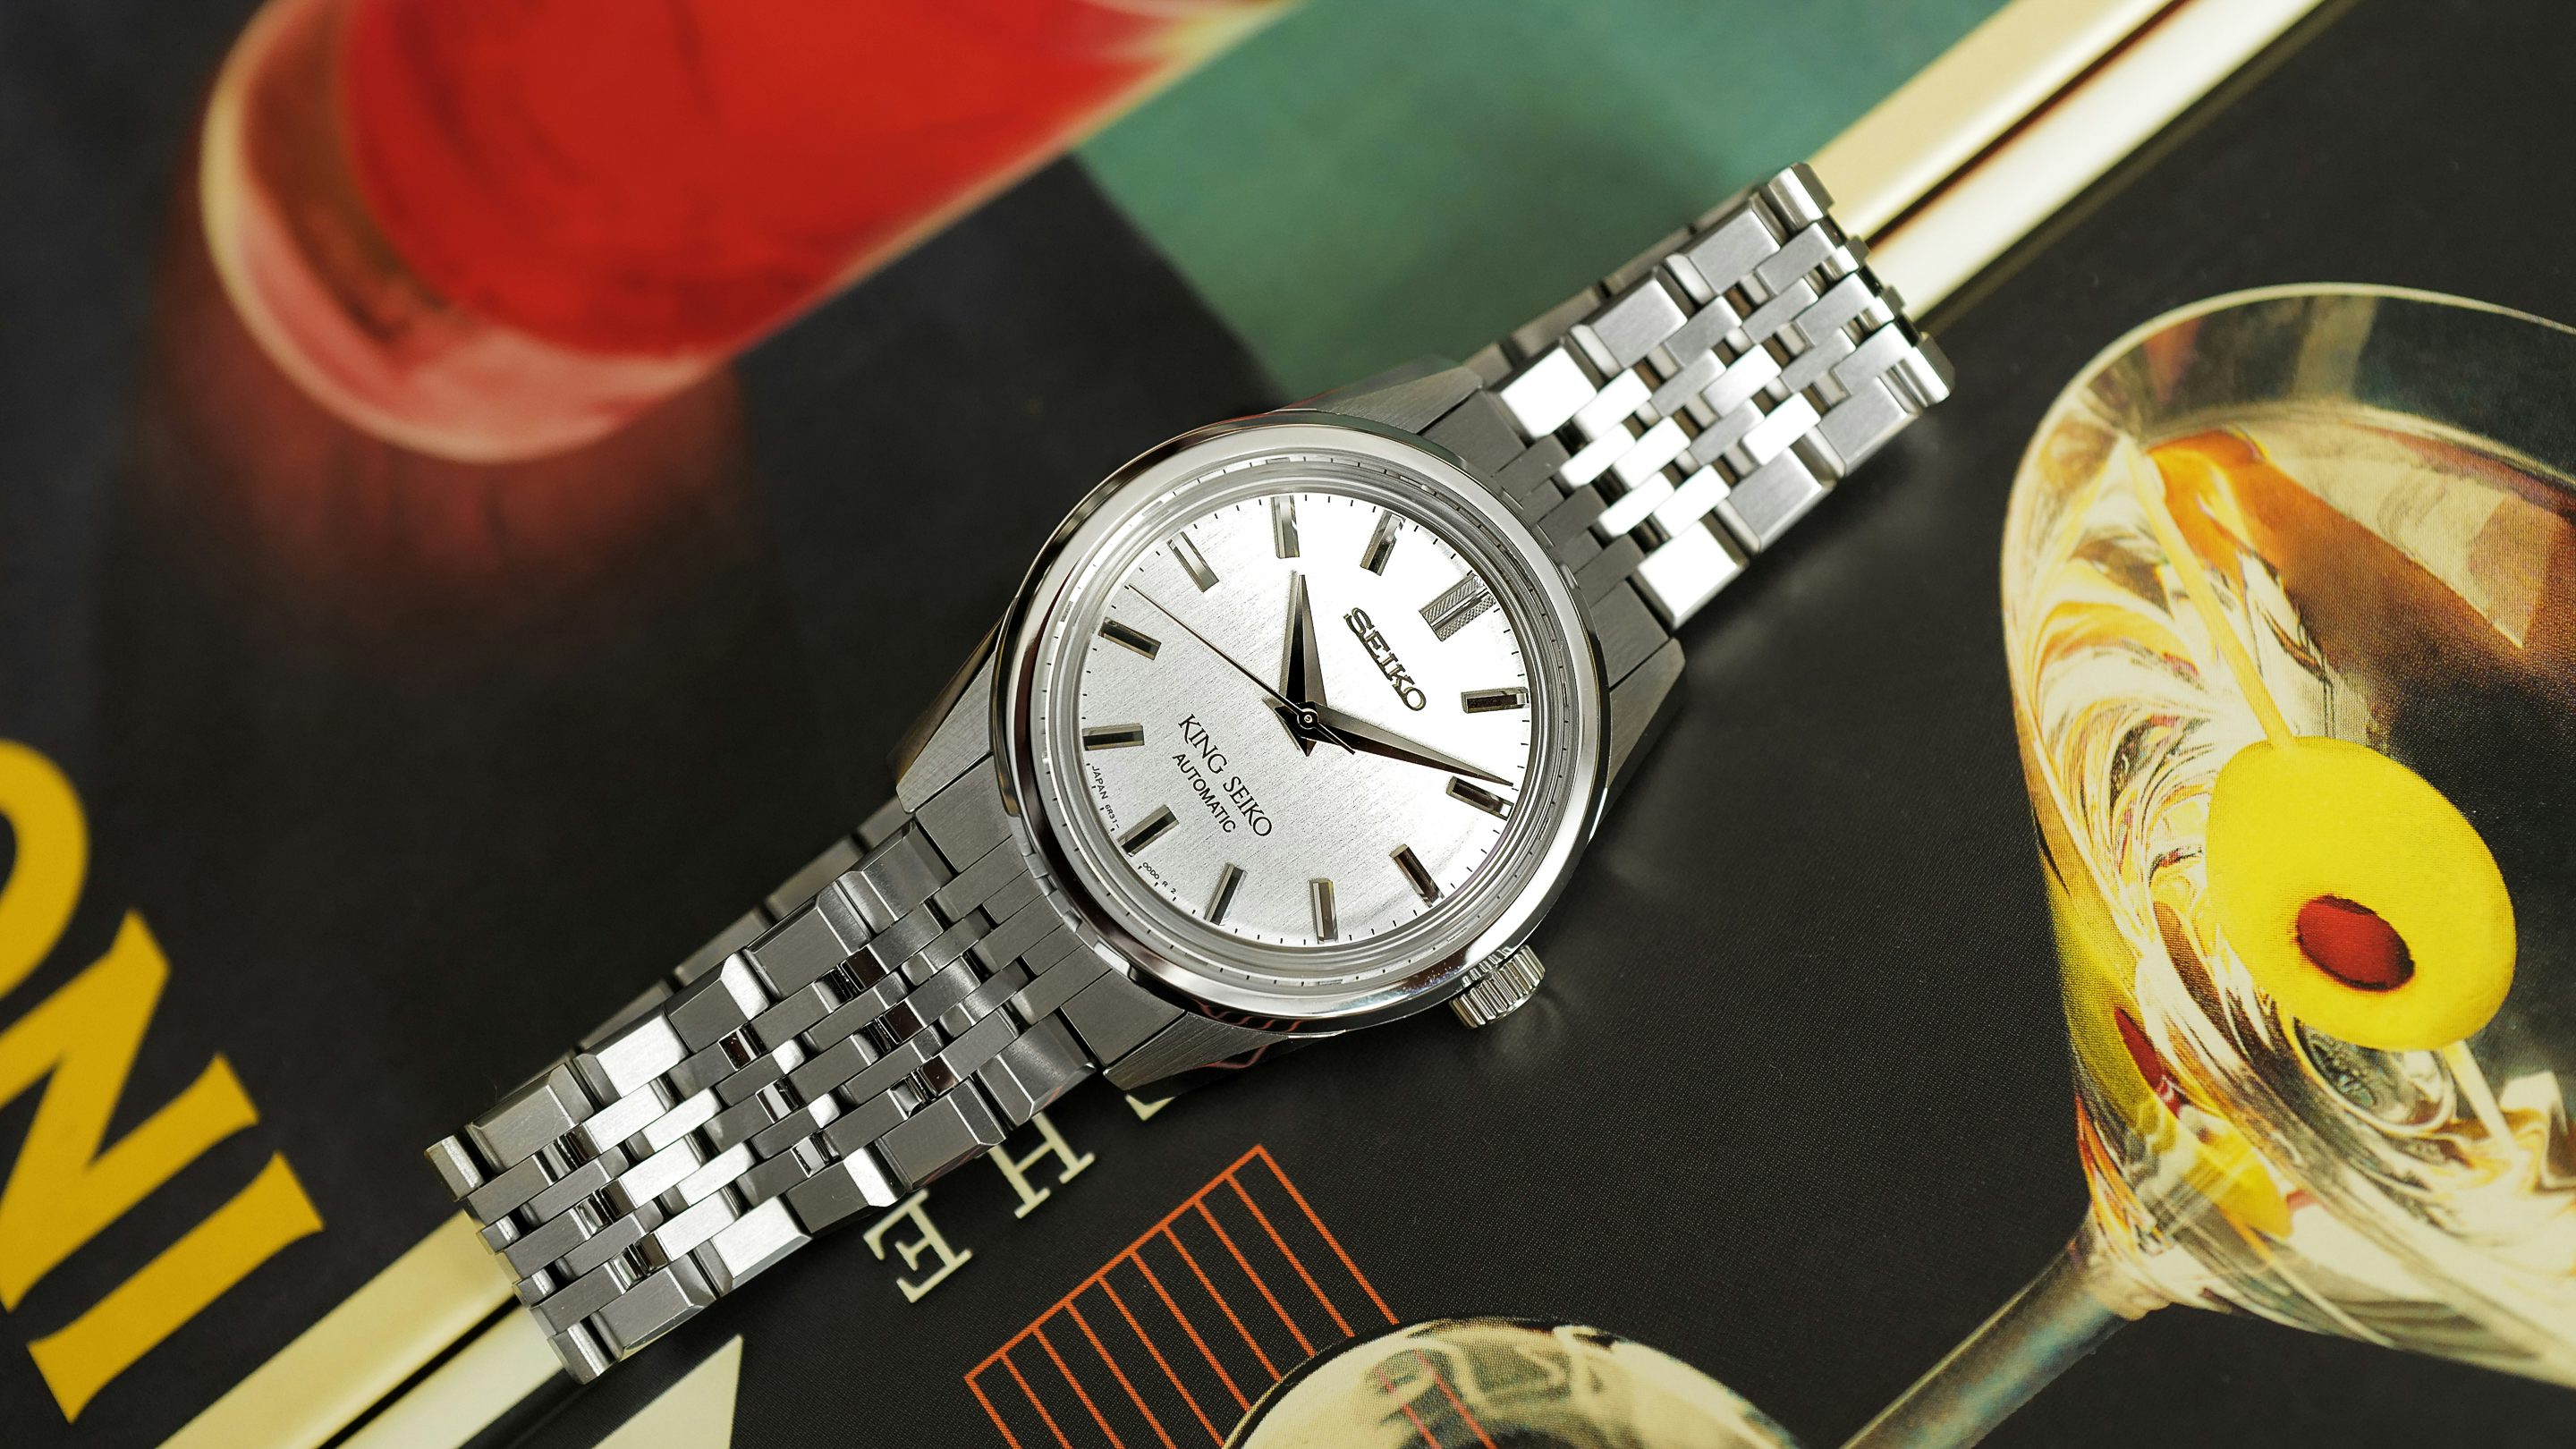 The King Seiko Might Be Seiko's Coolest Watch